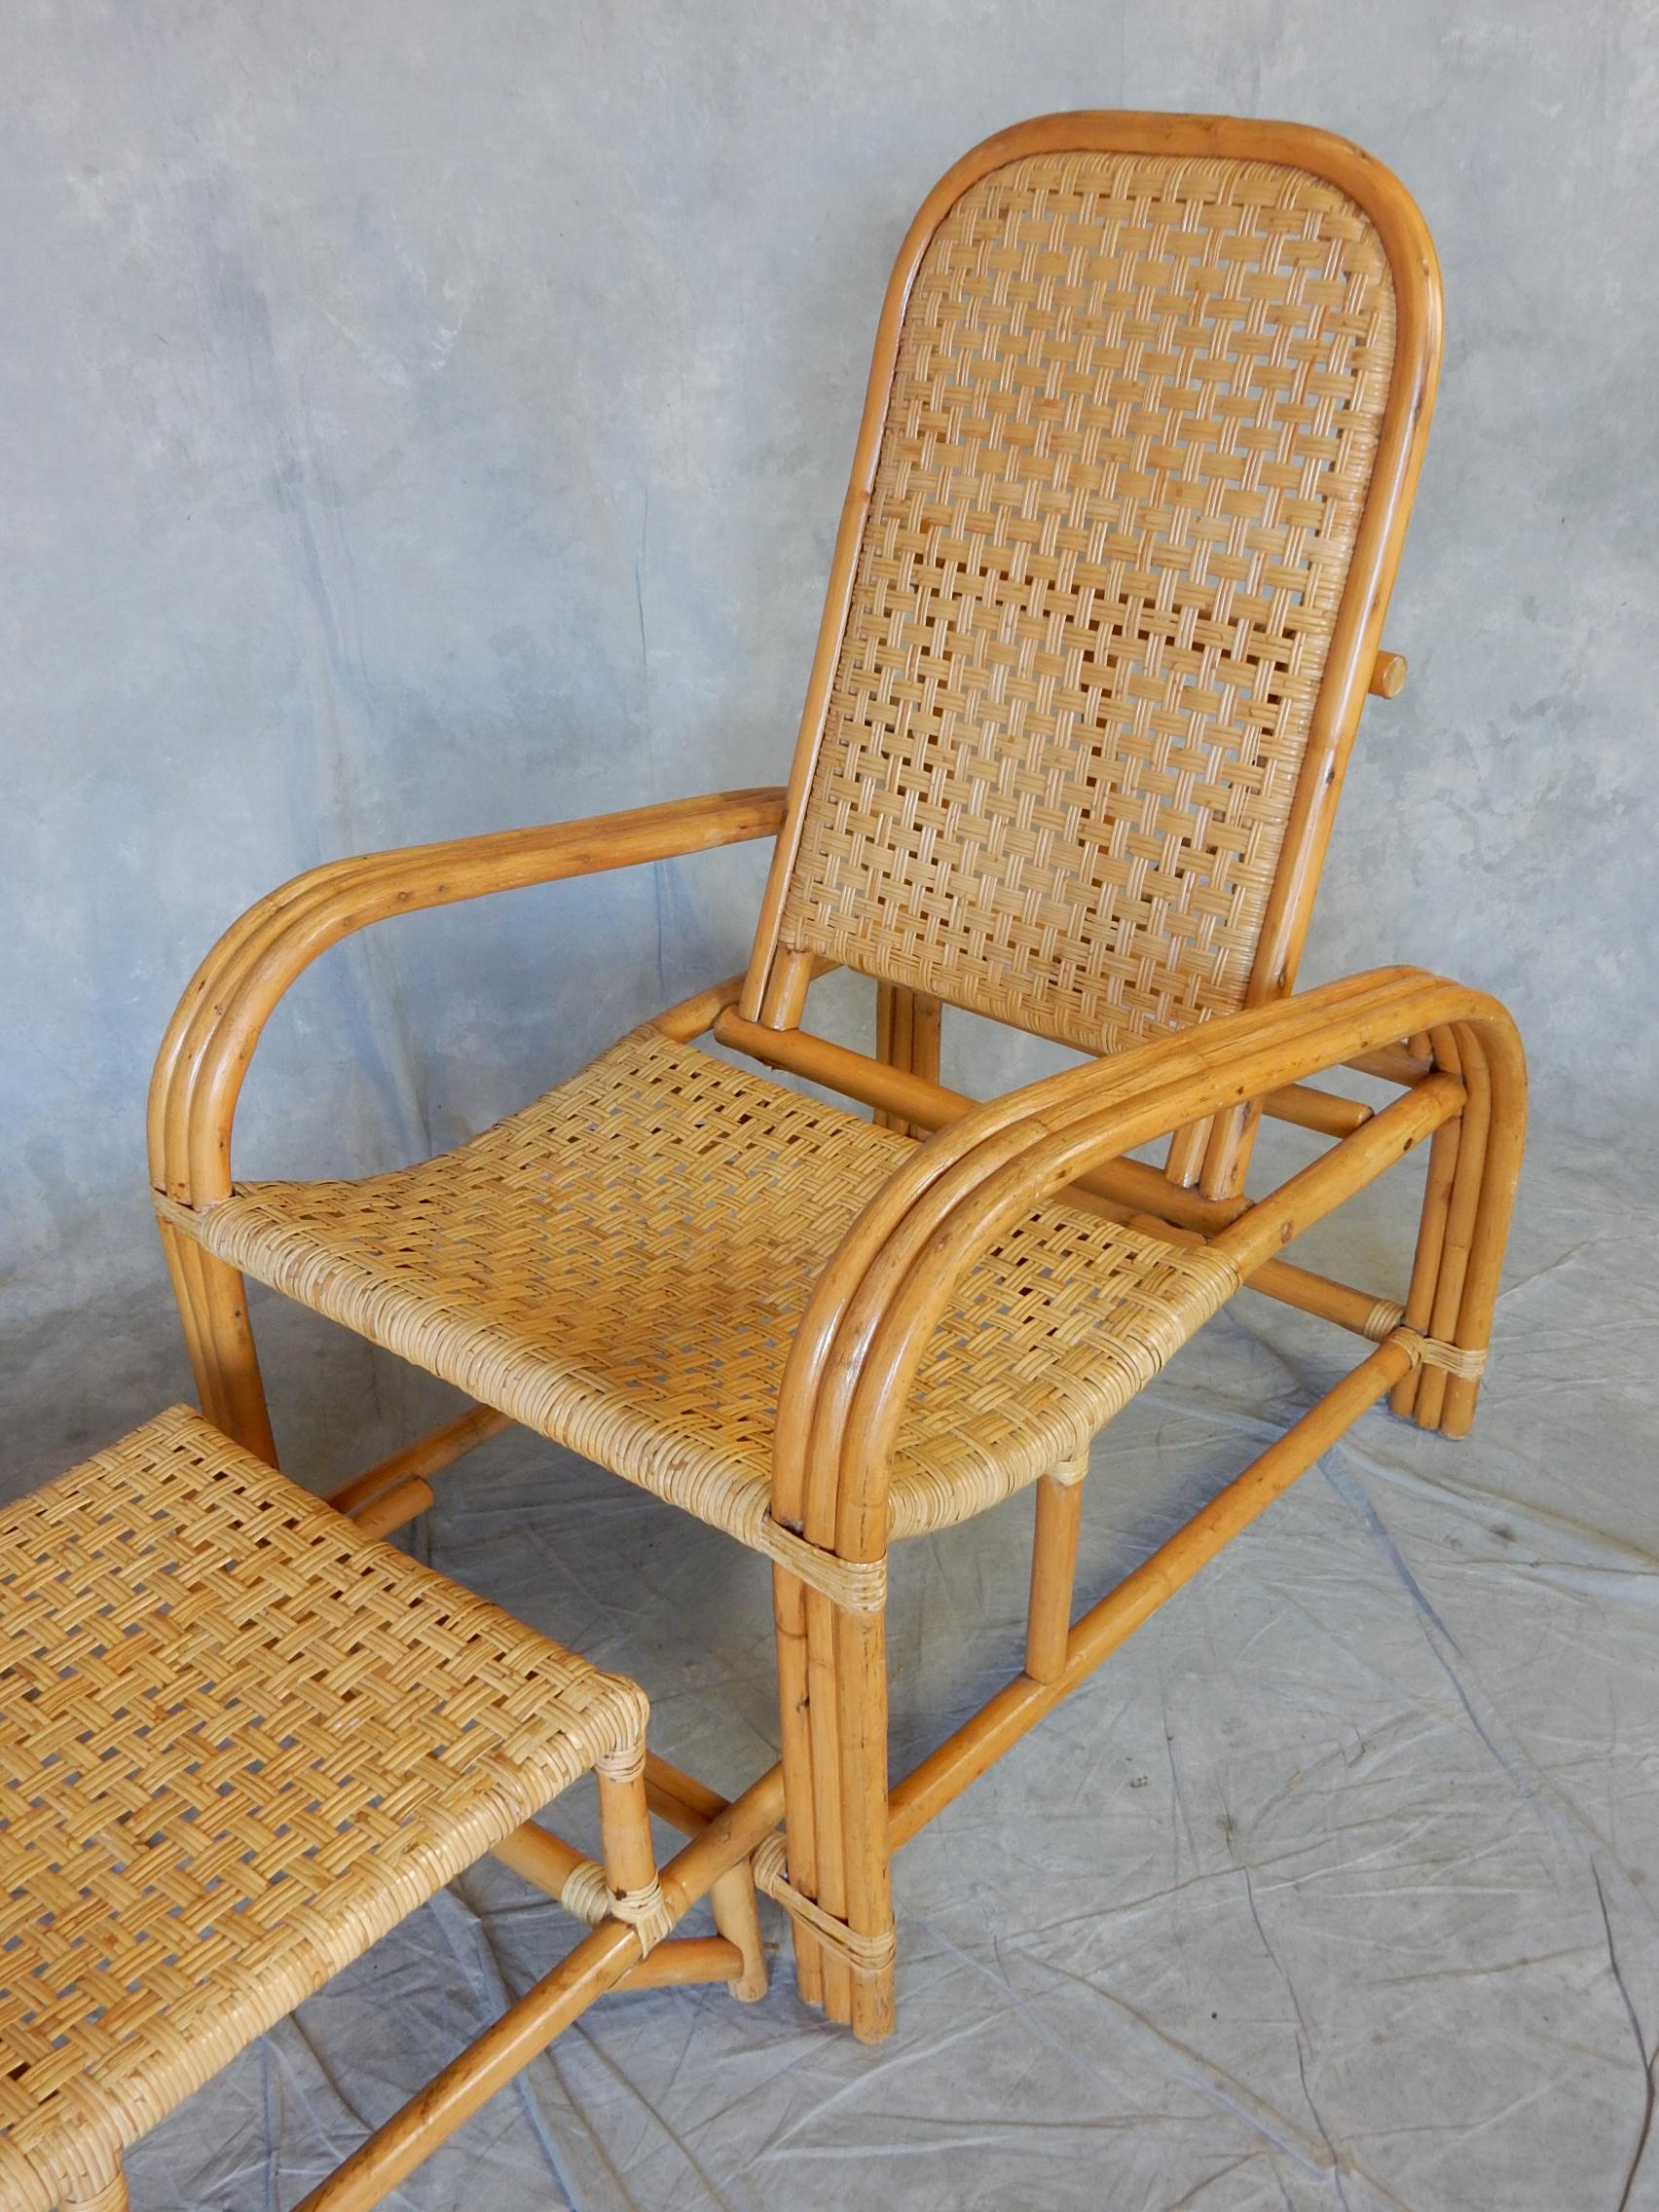 1950's Rattan & Woven Cane Chaise Lounge Chair Paul Laszlo Style In Fair Condition For Sale In Las Vegas, NV